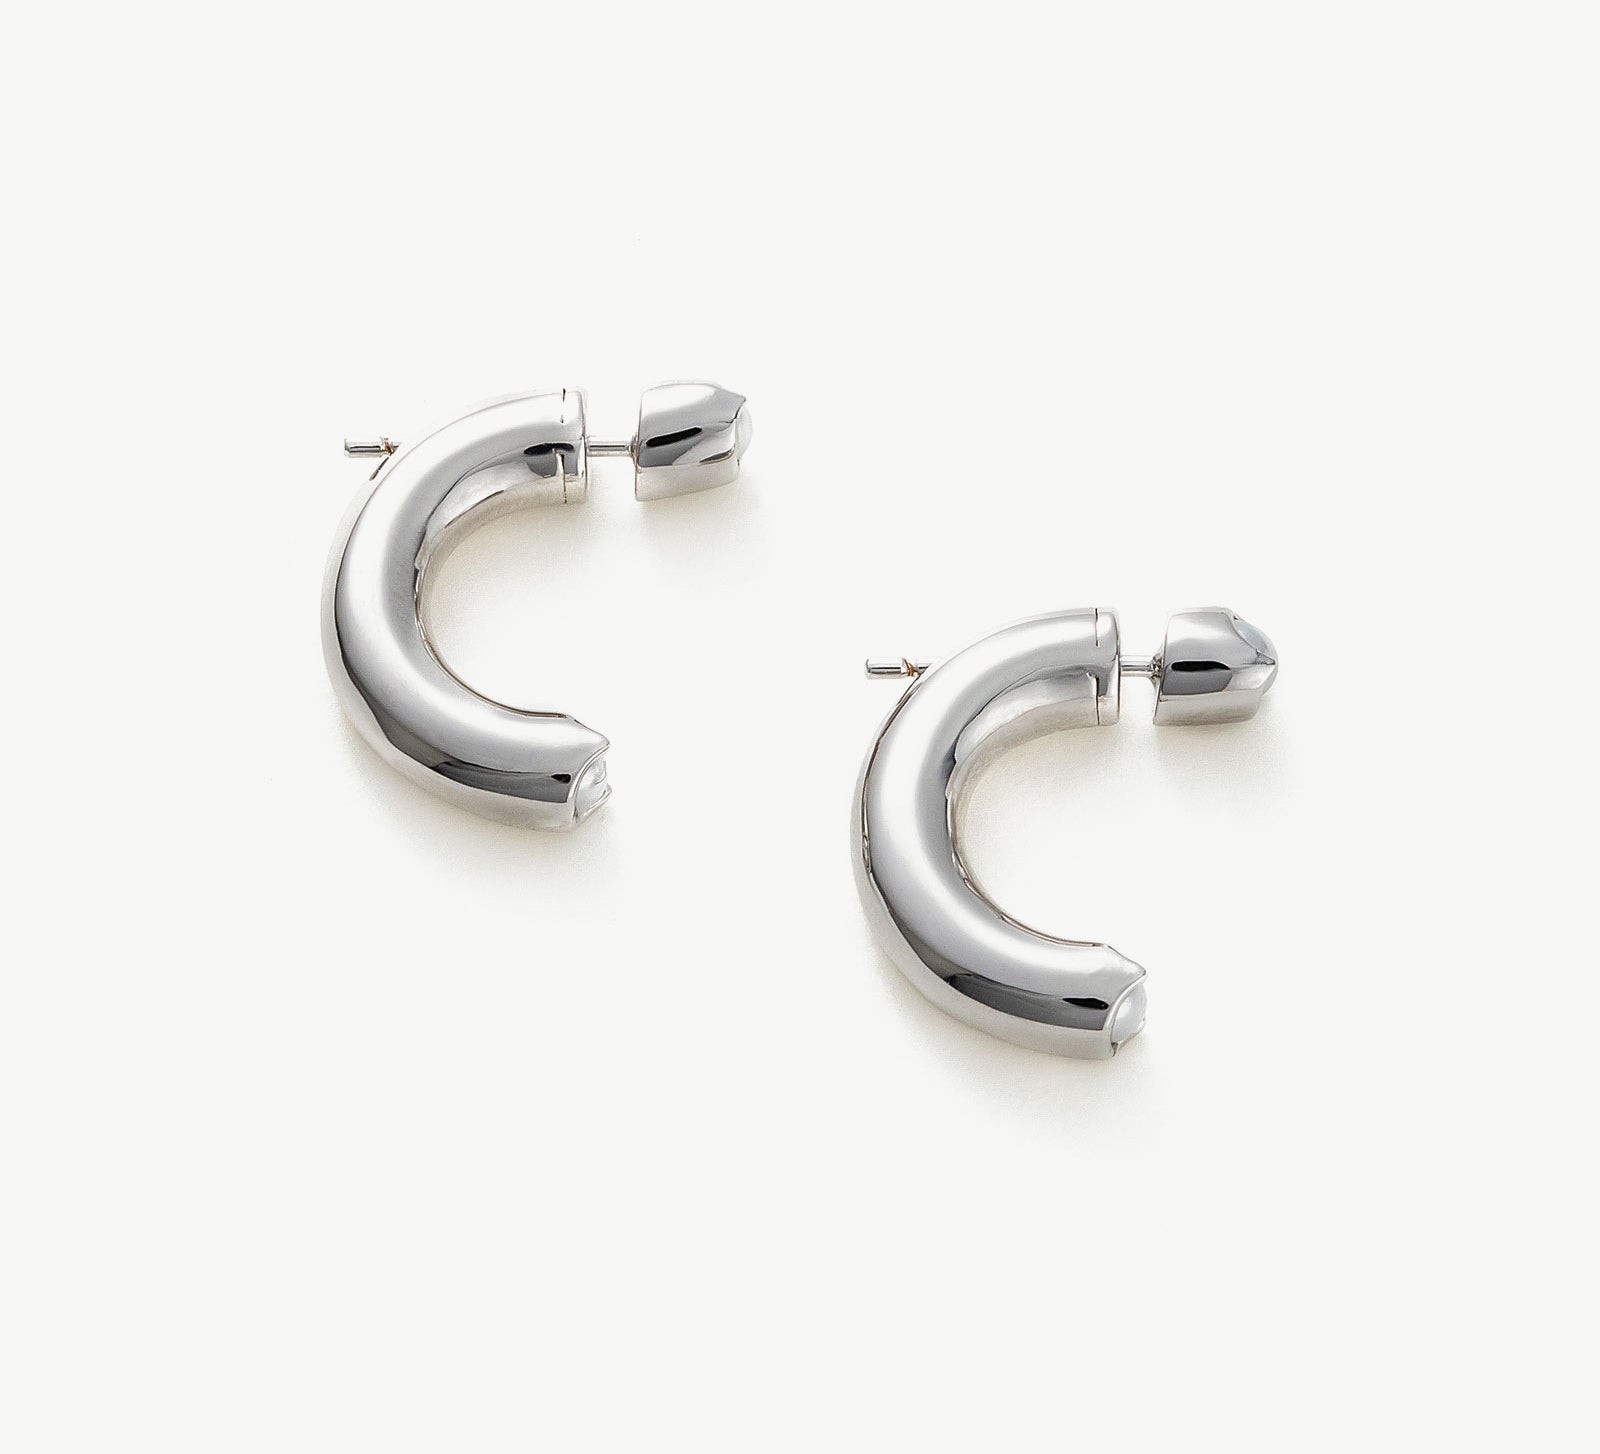 Mini Hoop Earrings in Silver, sleek and stylish, these mini hoops in silver tones offer a modern and versatile addition to your ear accessories